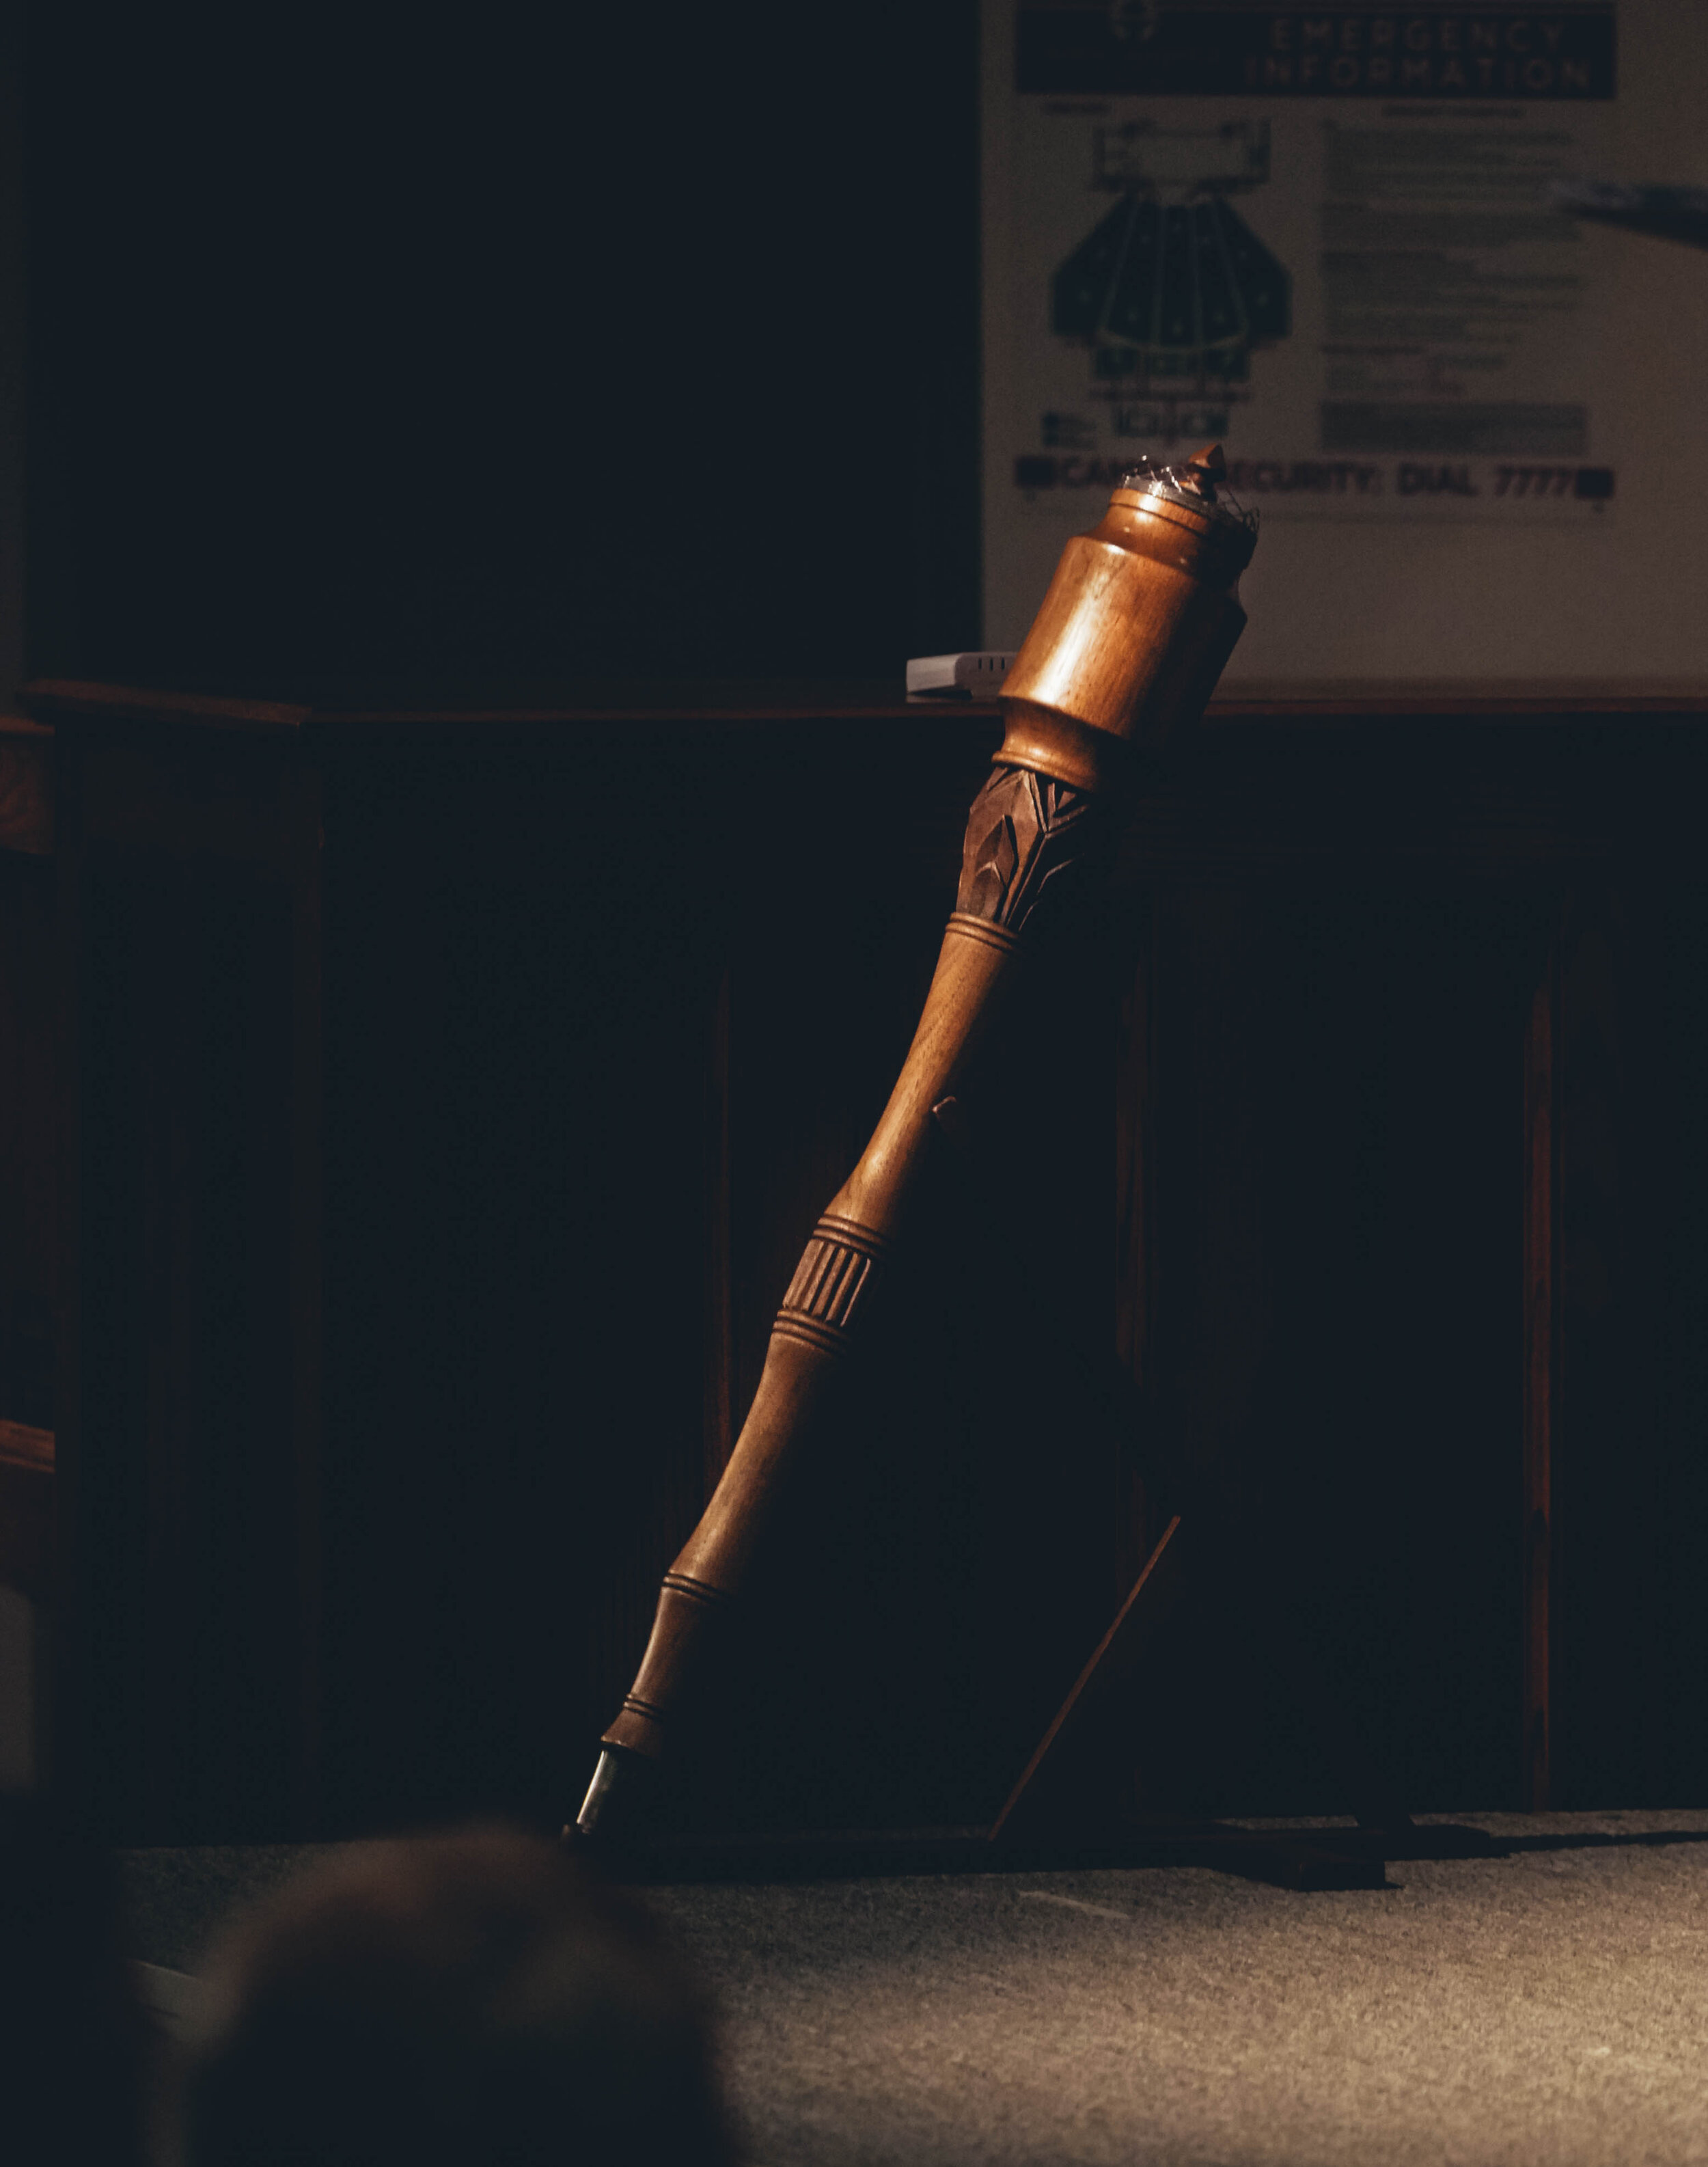 The scepter carried by Bill Cashion sits in its place on stage.